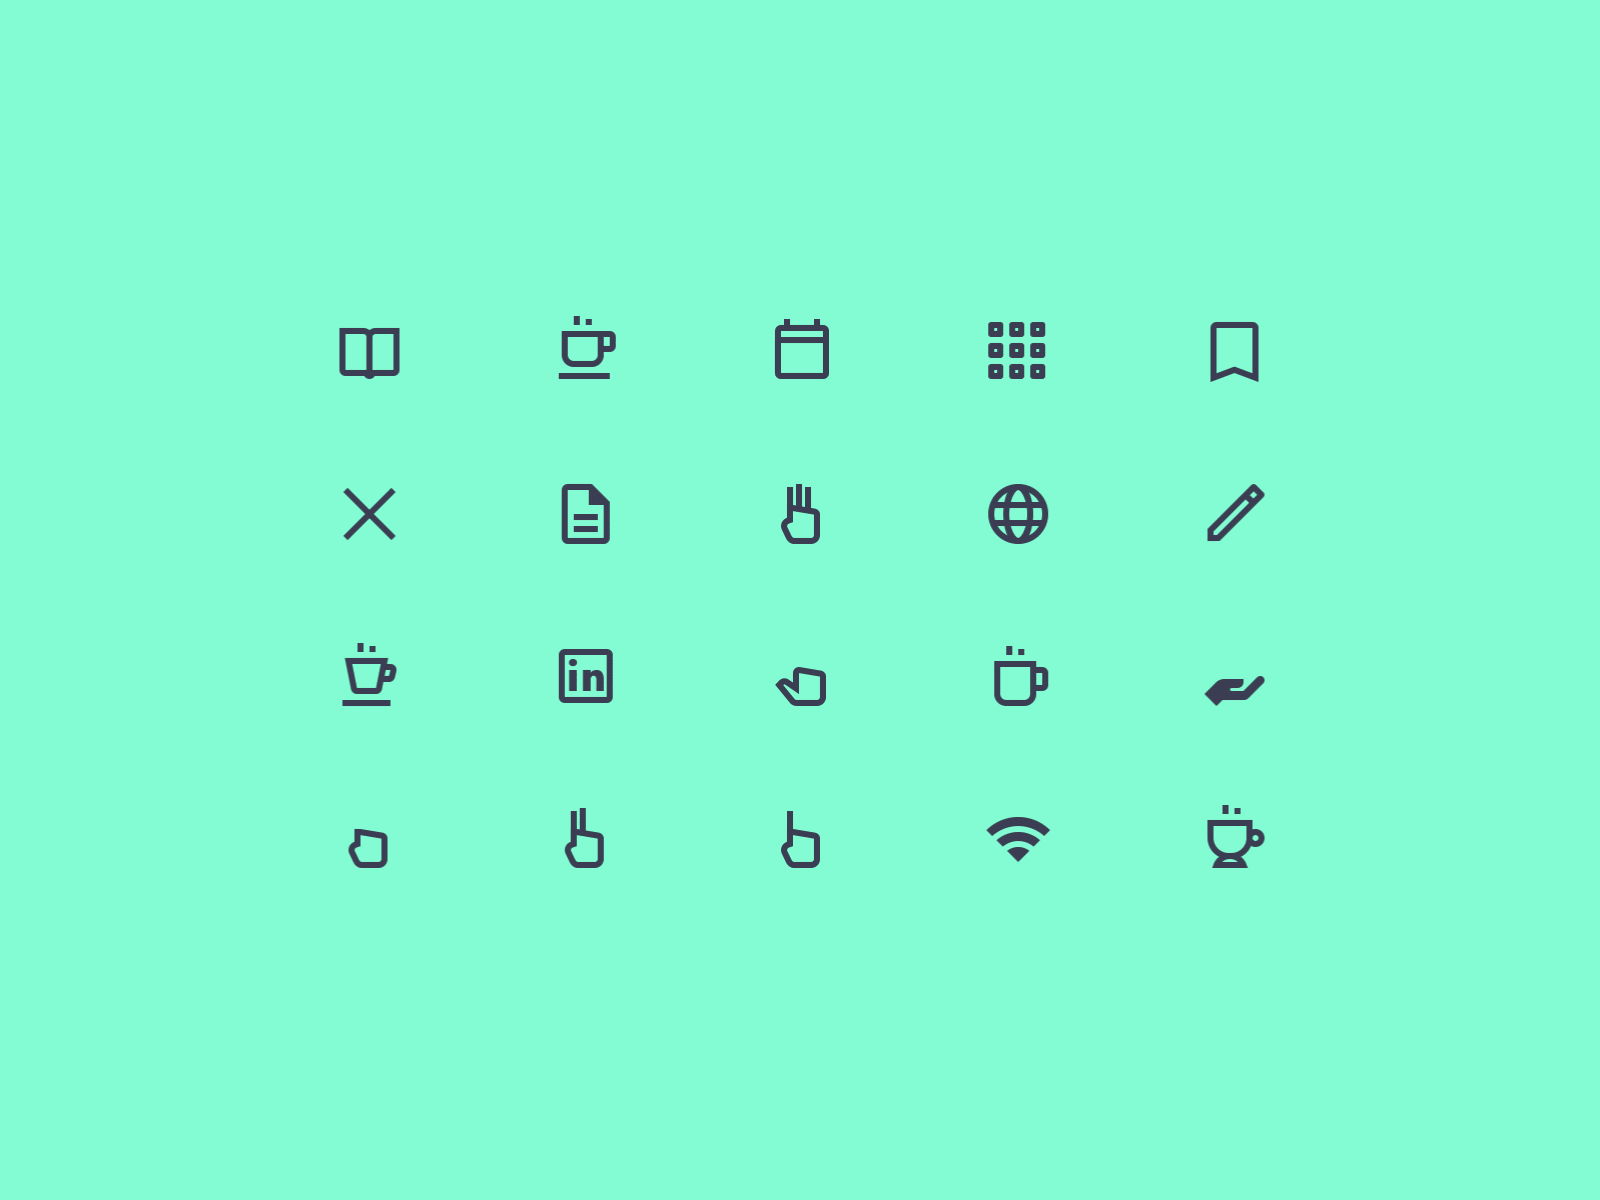 Animated Material Icons by Margarita Ivanchikova for Icons8 on Dribbble